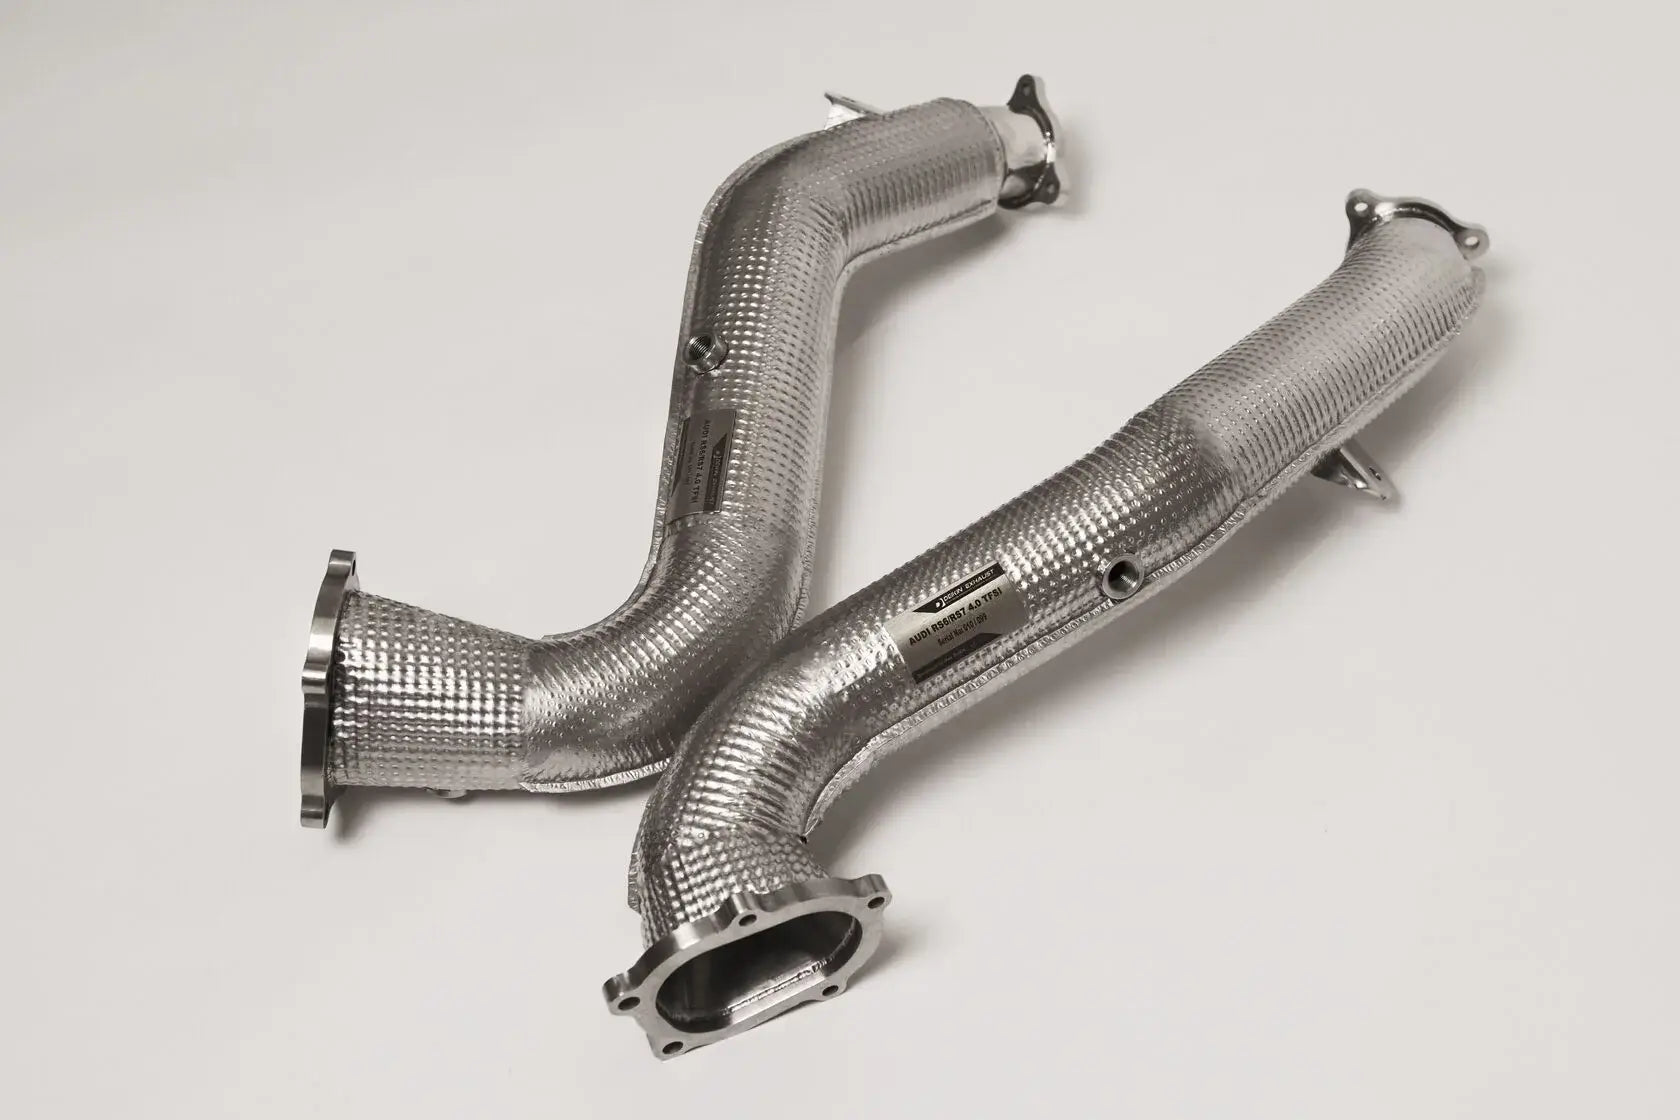 DEIKIN 10-AUDI.RS7.C7-DP Downpipe for AUDI RS7 (C7) without HeatShield Photo-3 